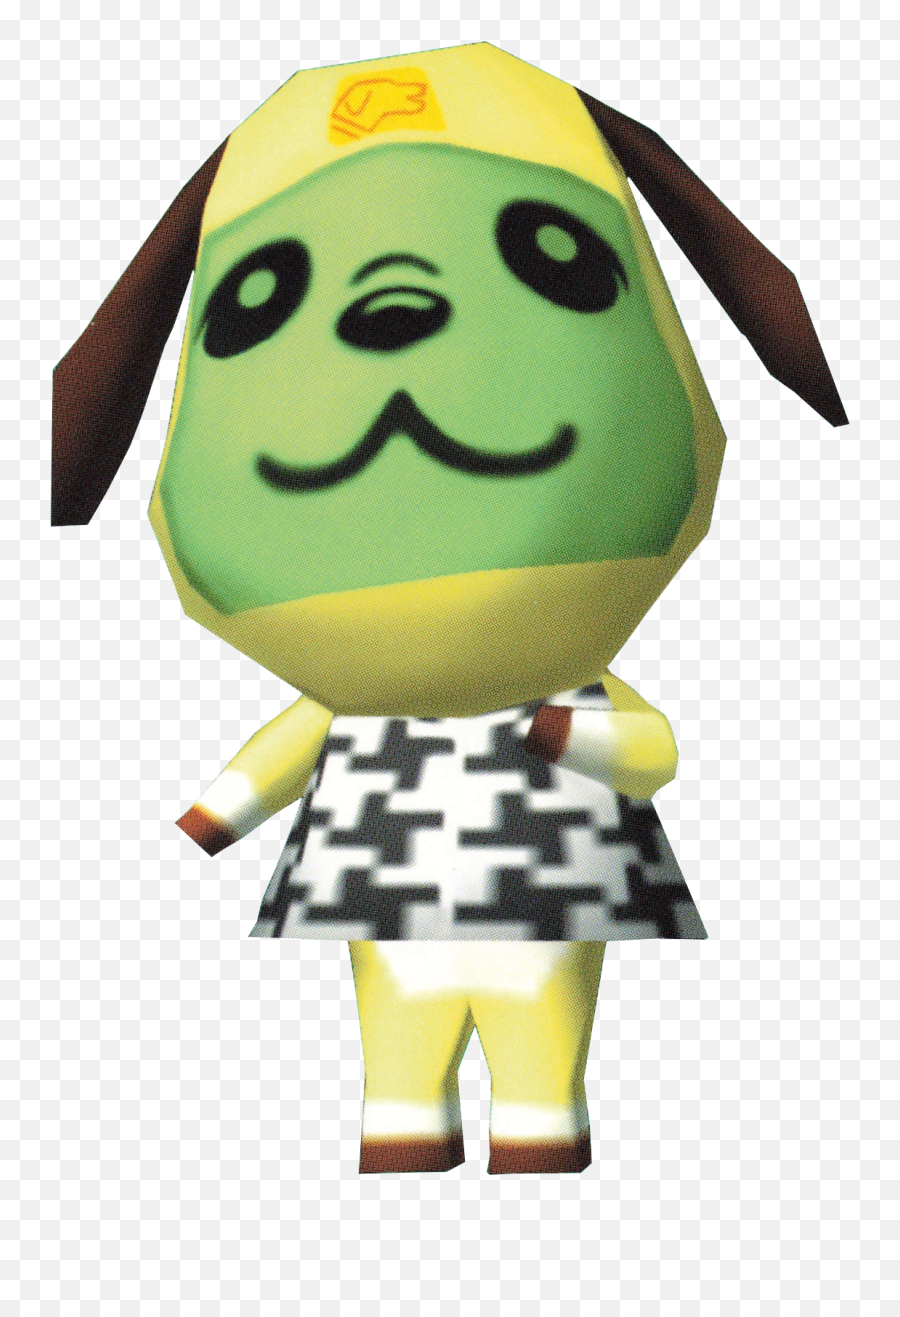 Bow - Animal Crossing Villagers That Were Removed Emoji,Animal Crossig Emotions